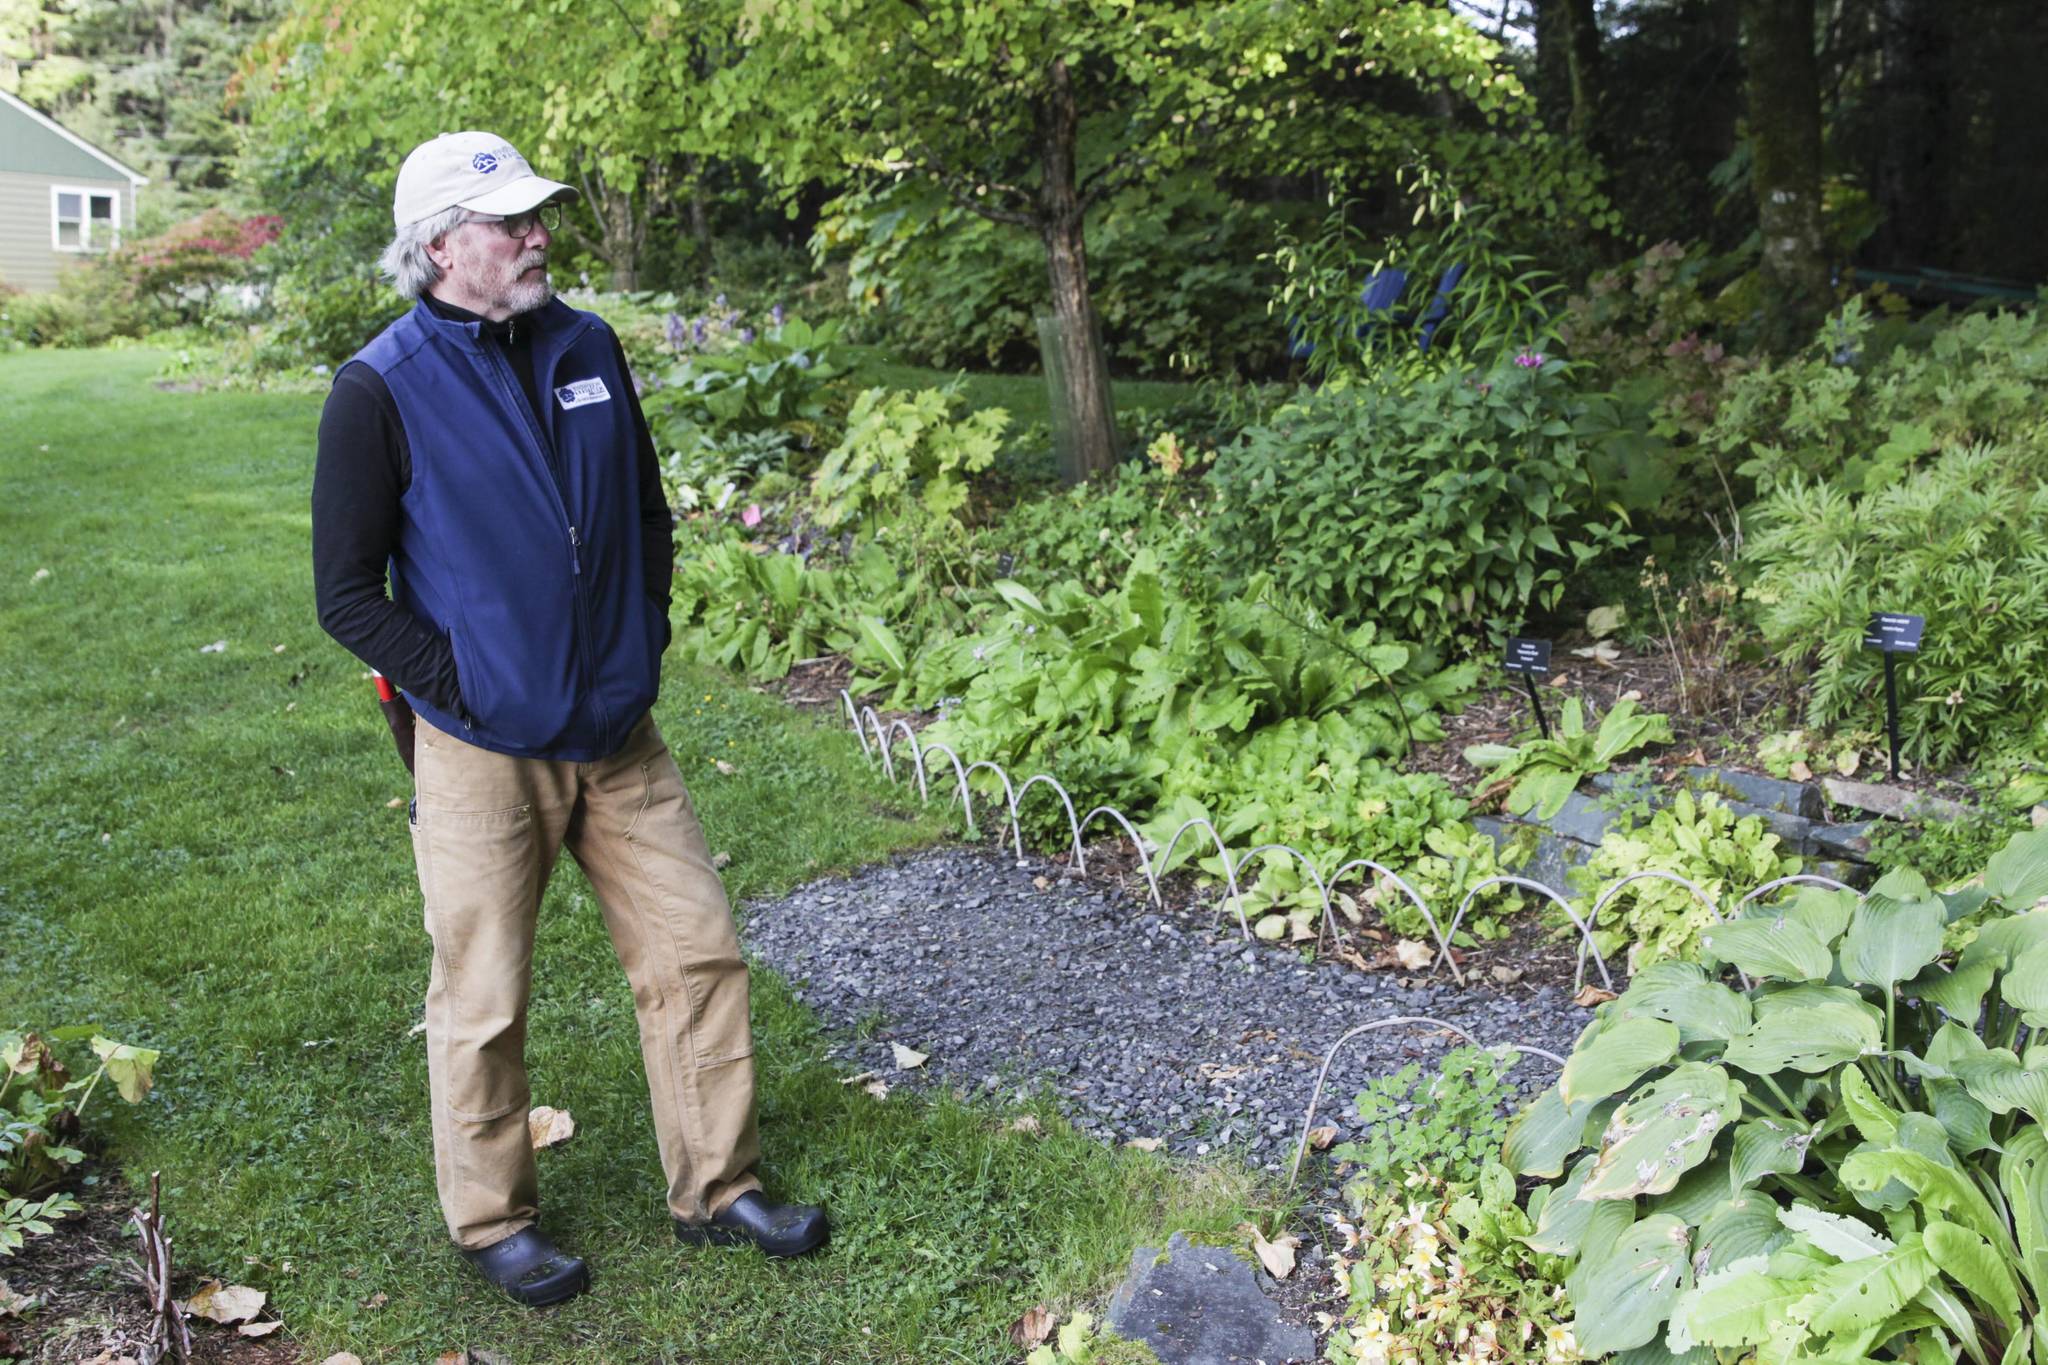 Michael S. Lockett / Juneau Empire Jensen-Olson Arboretum’s longtime manager, Merrill Jensen, is retiring after 13 years guiding and shaping the space.